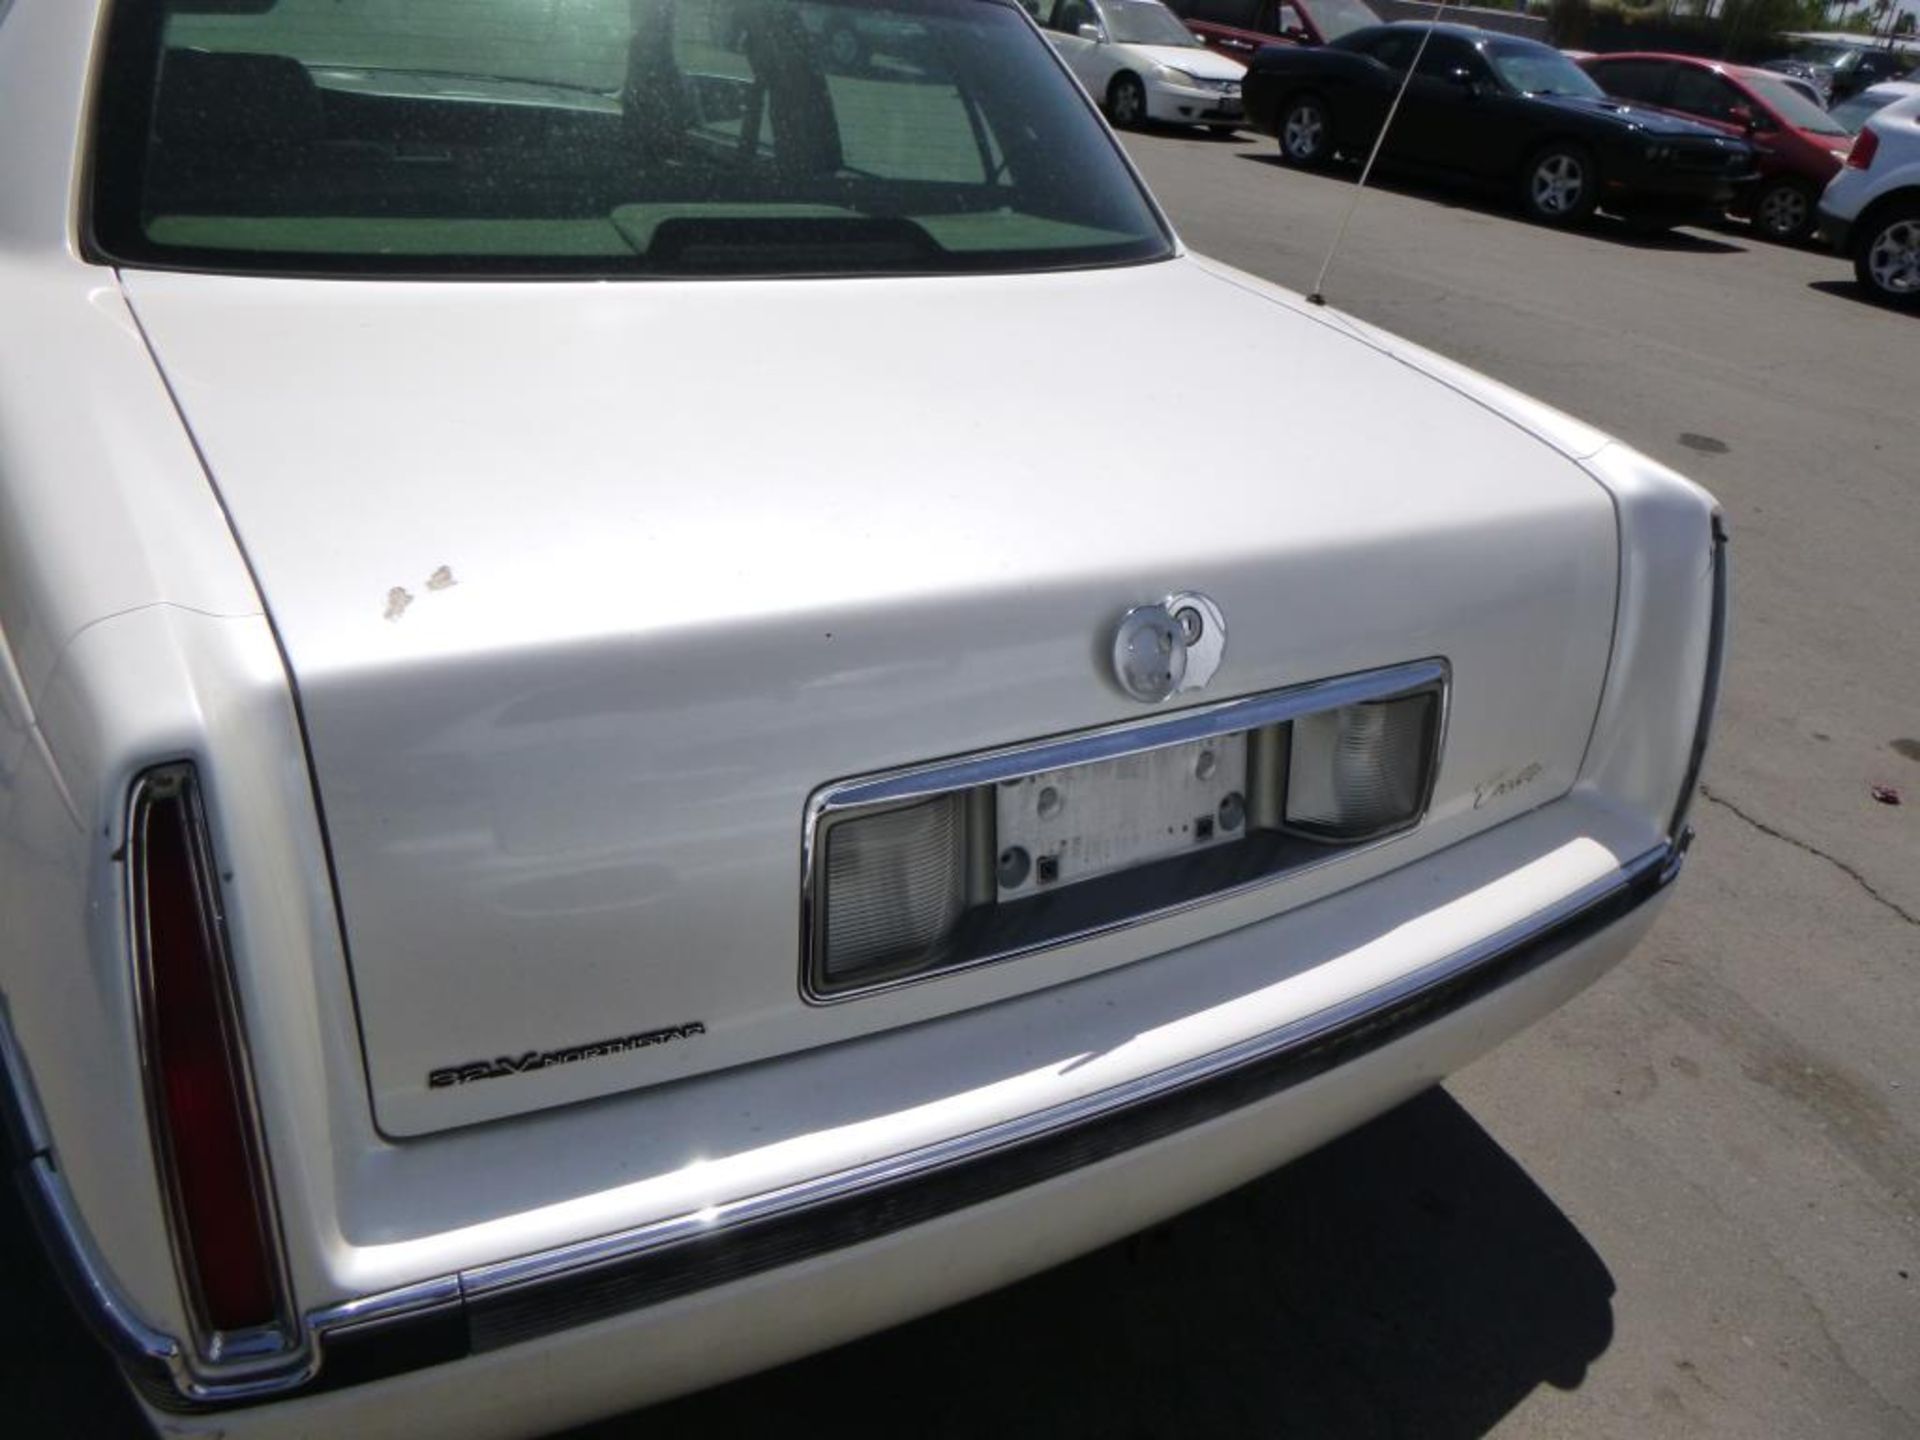 (Lot # 3323) 1994 Cadillac Deville - Image 7 of 13